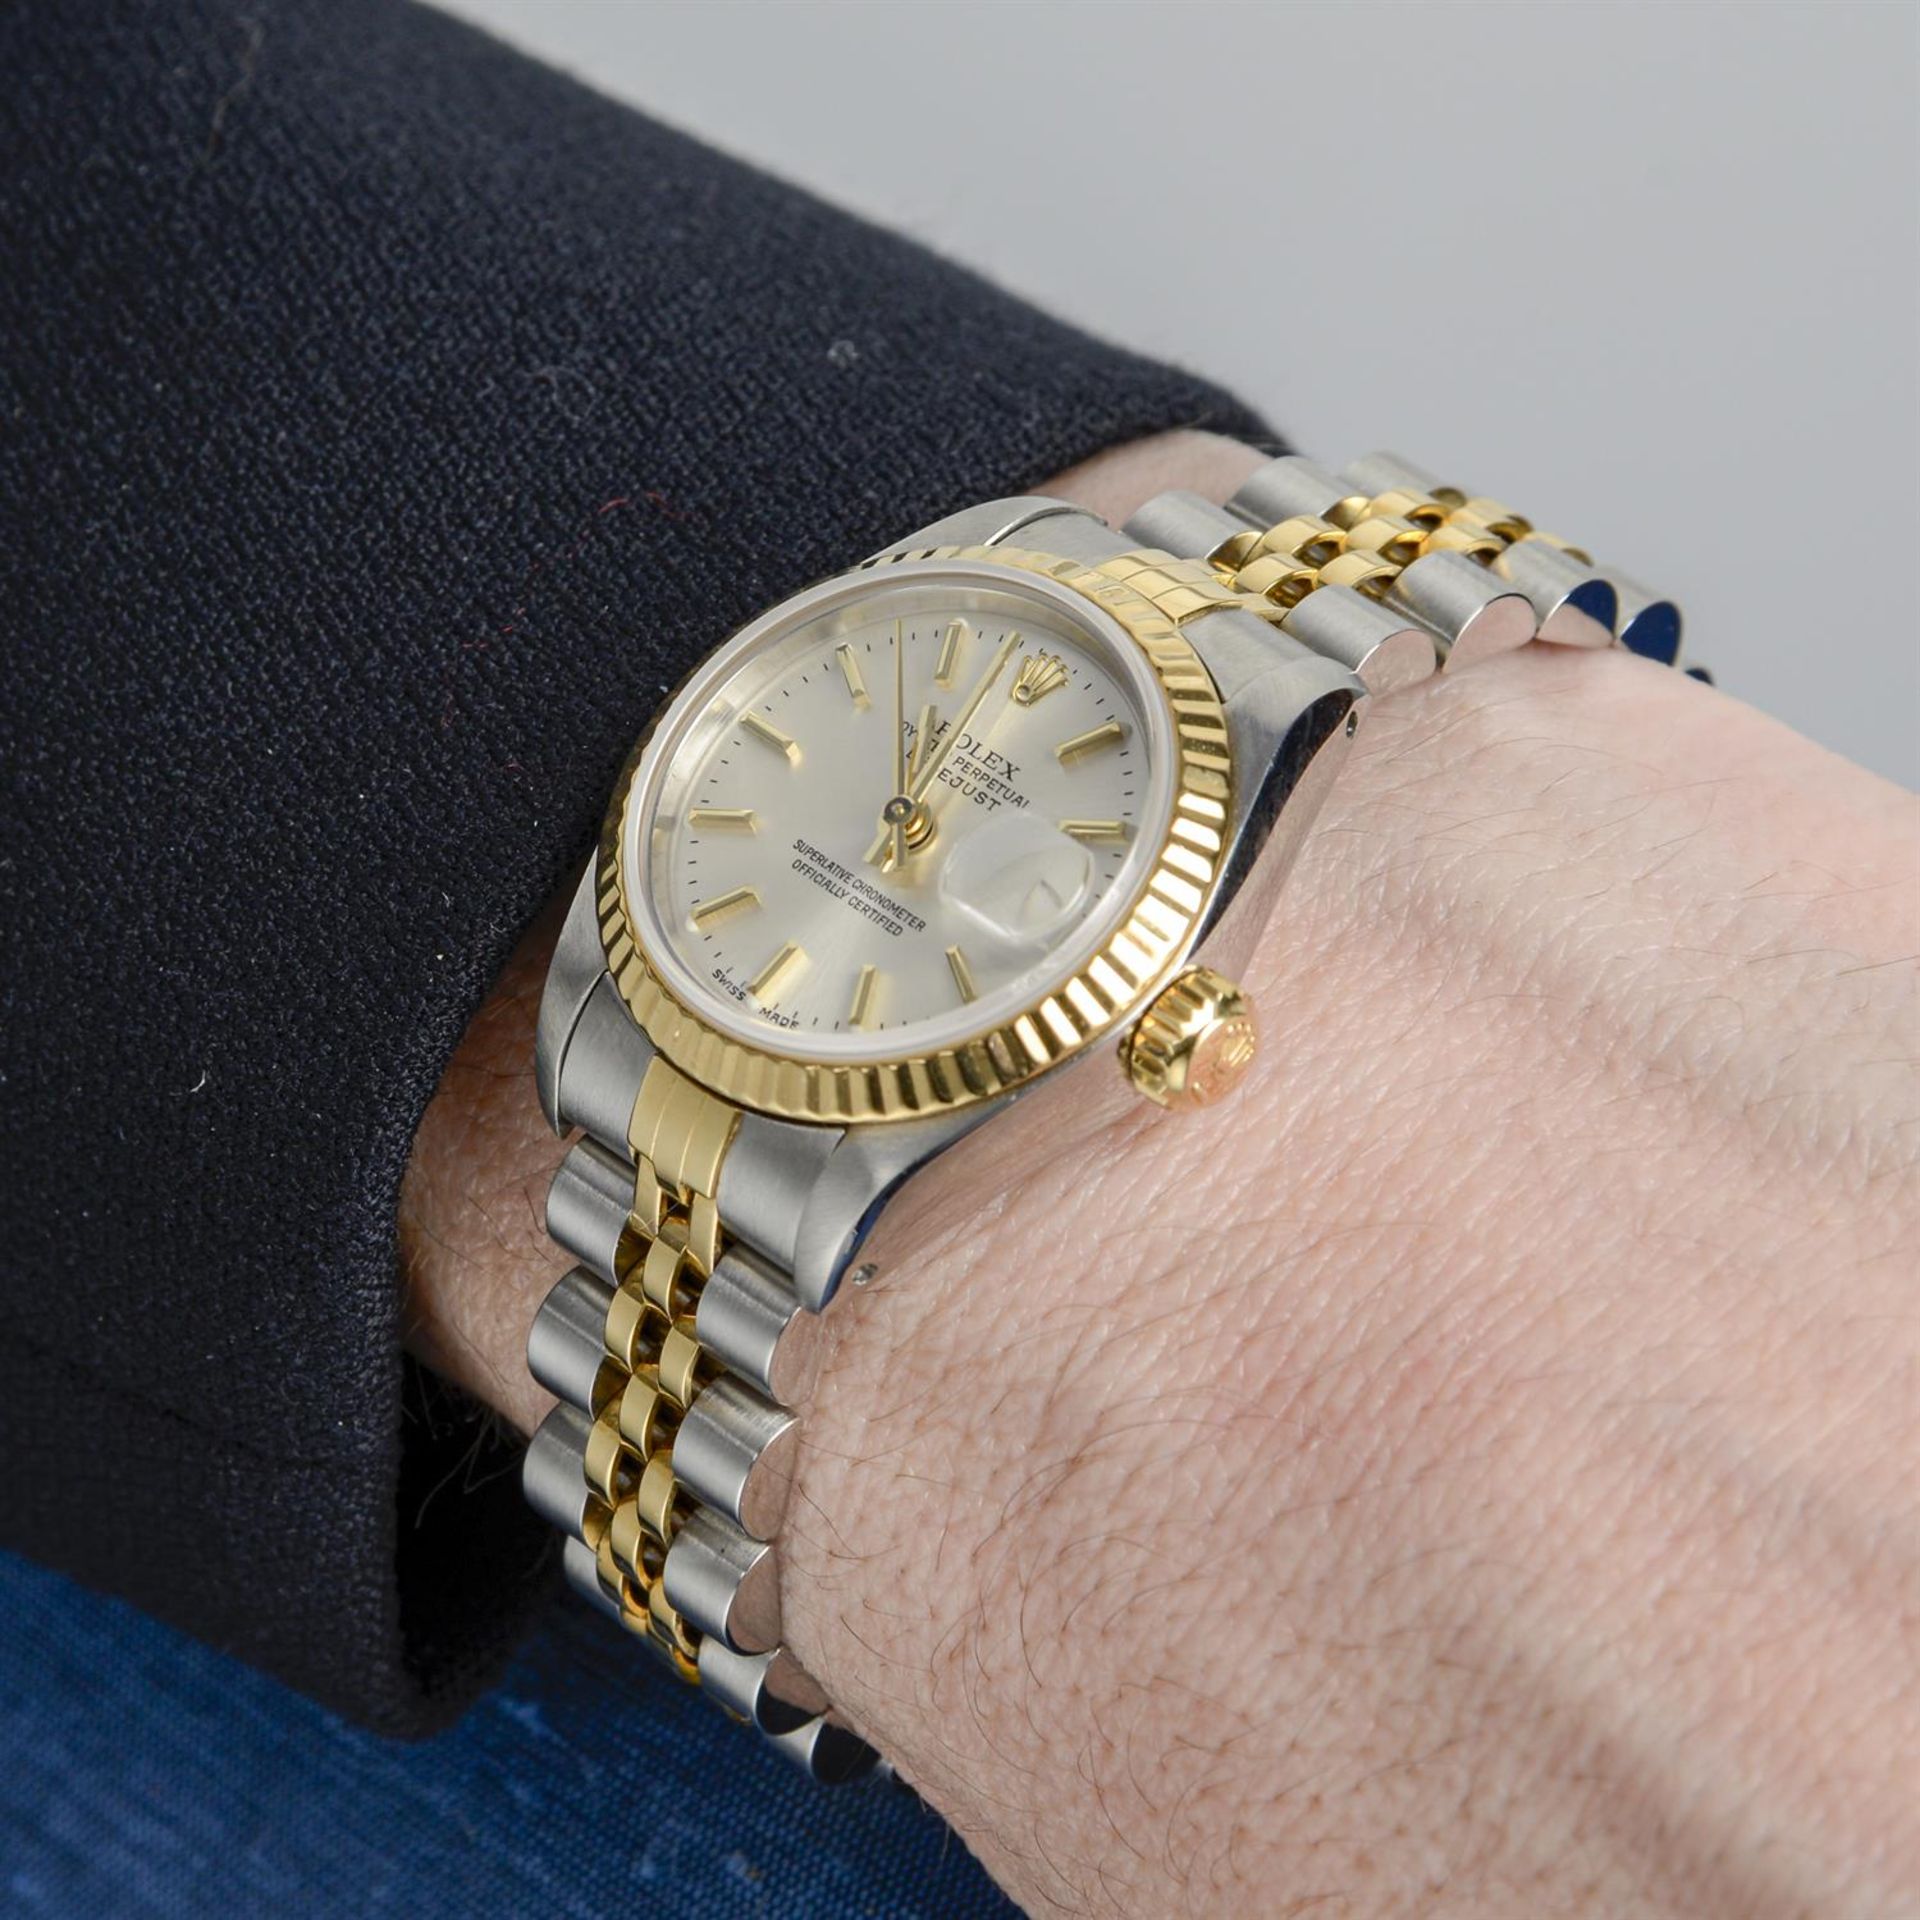 Rolex - an Oyster Perpetual Datejust watch, 26mm. - Image 5 of 6